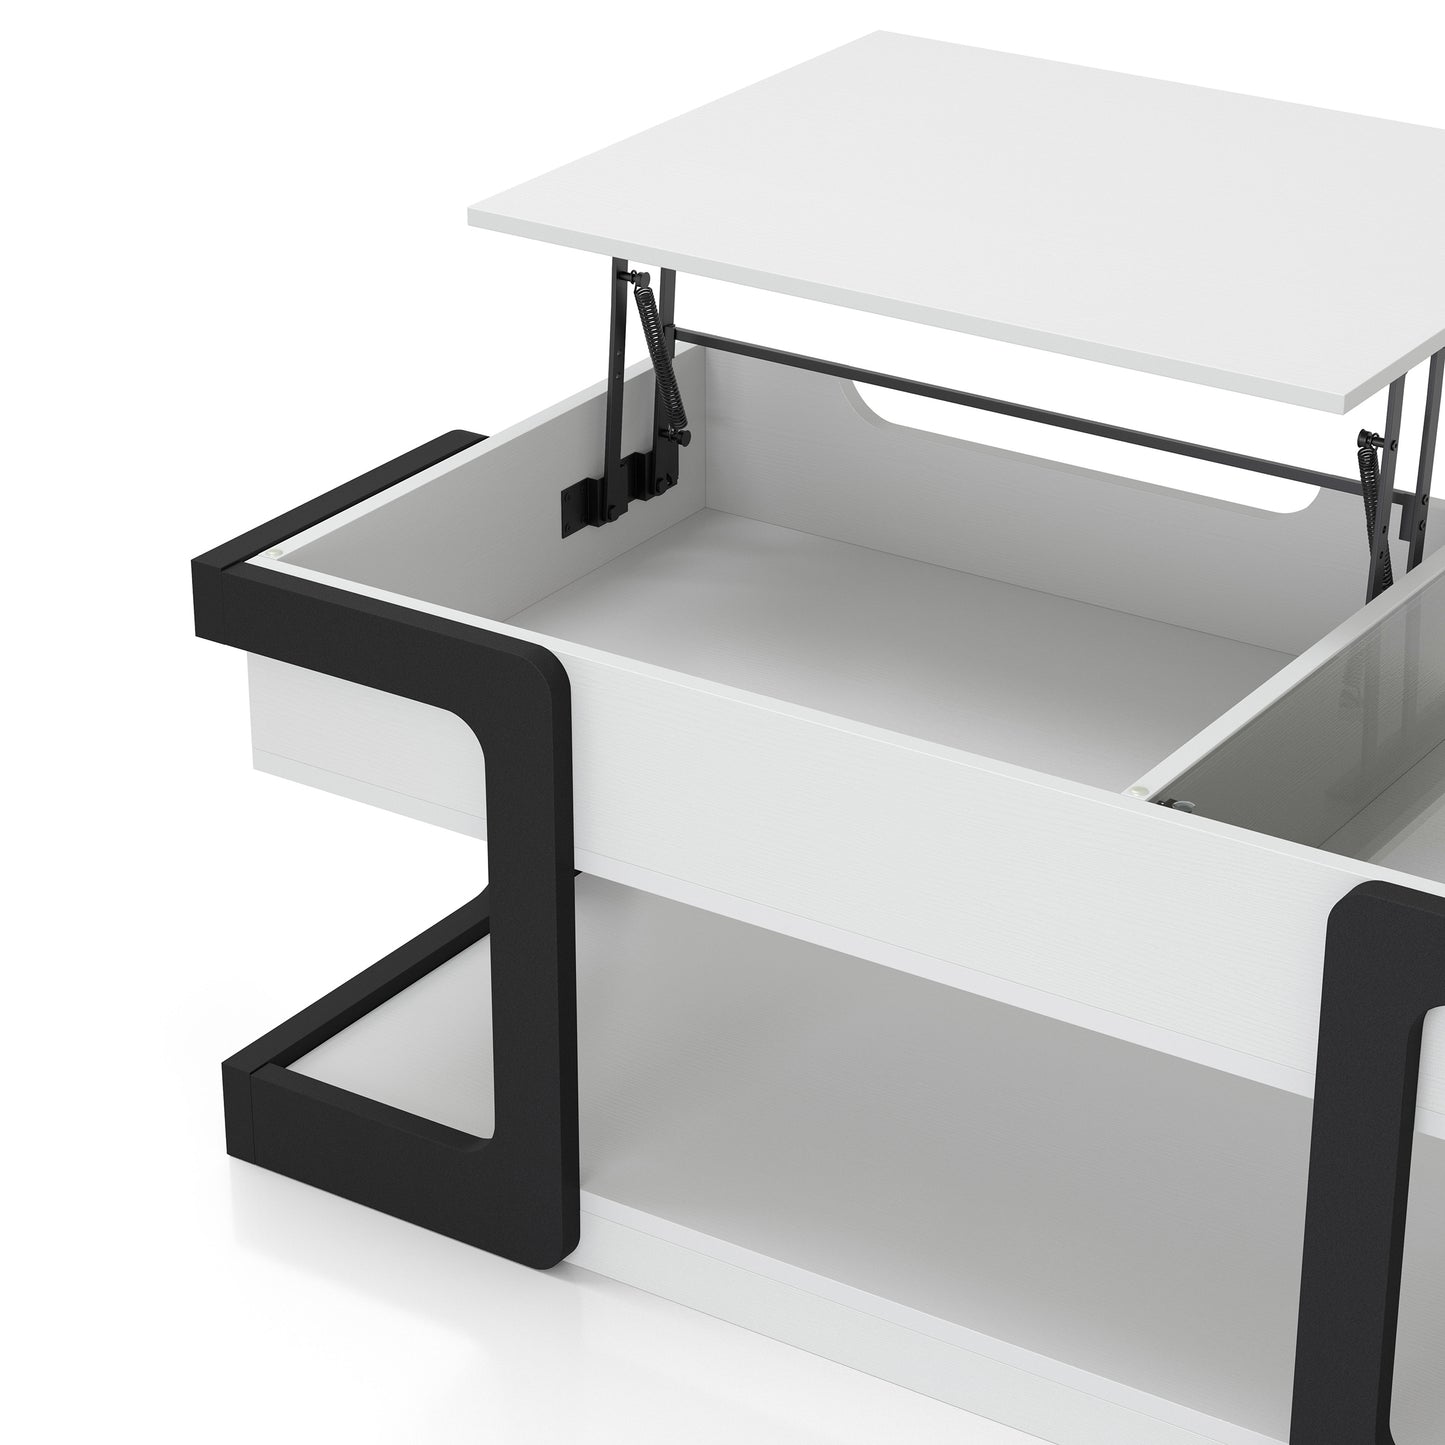 Left angled close-up view of a contemporary white and black lift-top storage coffee table with two shelves and top raised on a white background